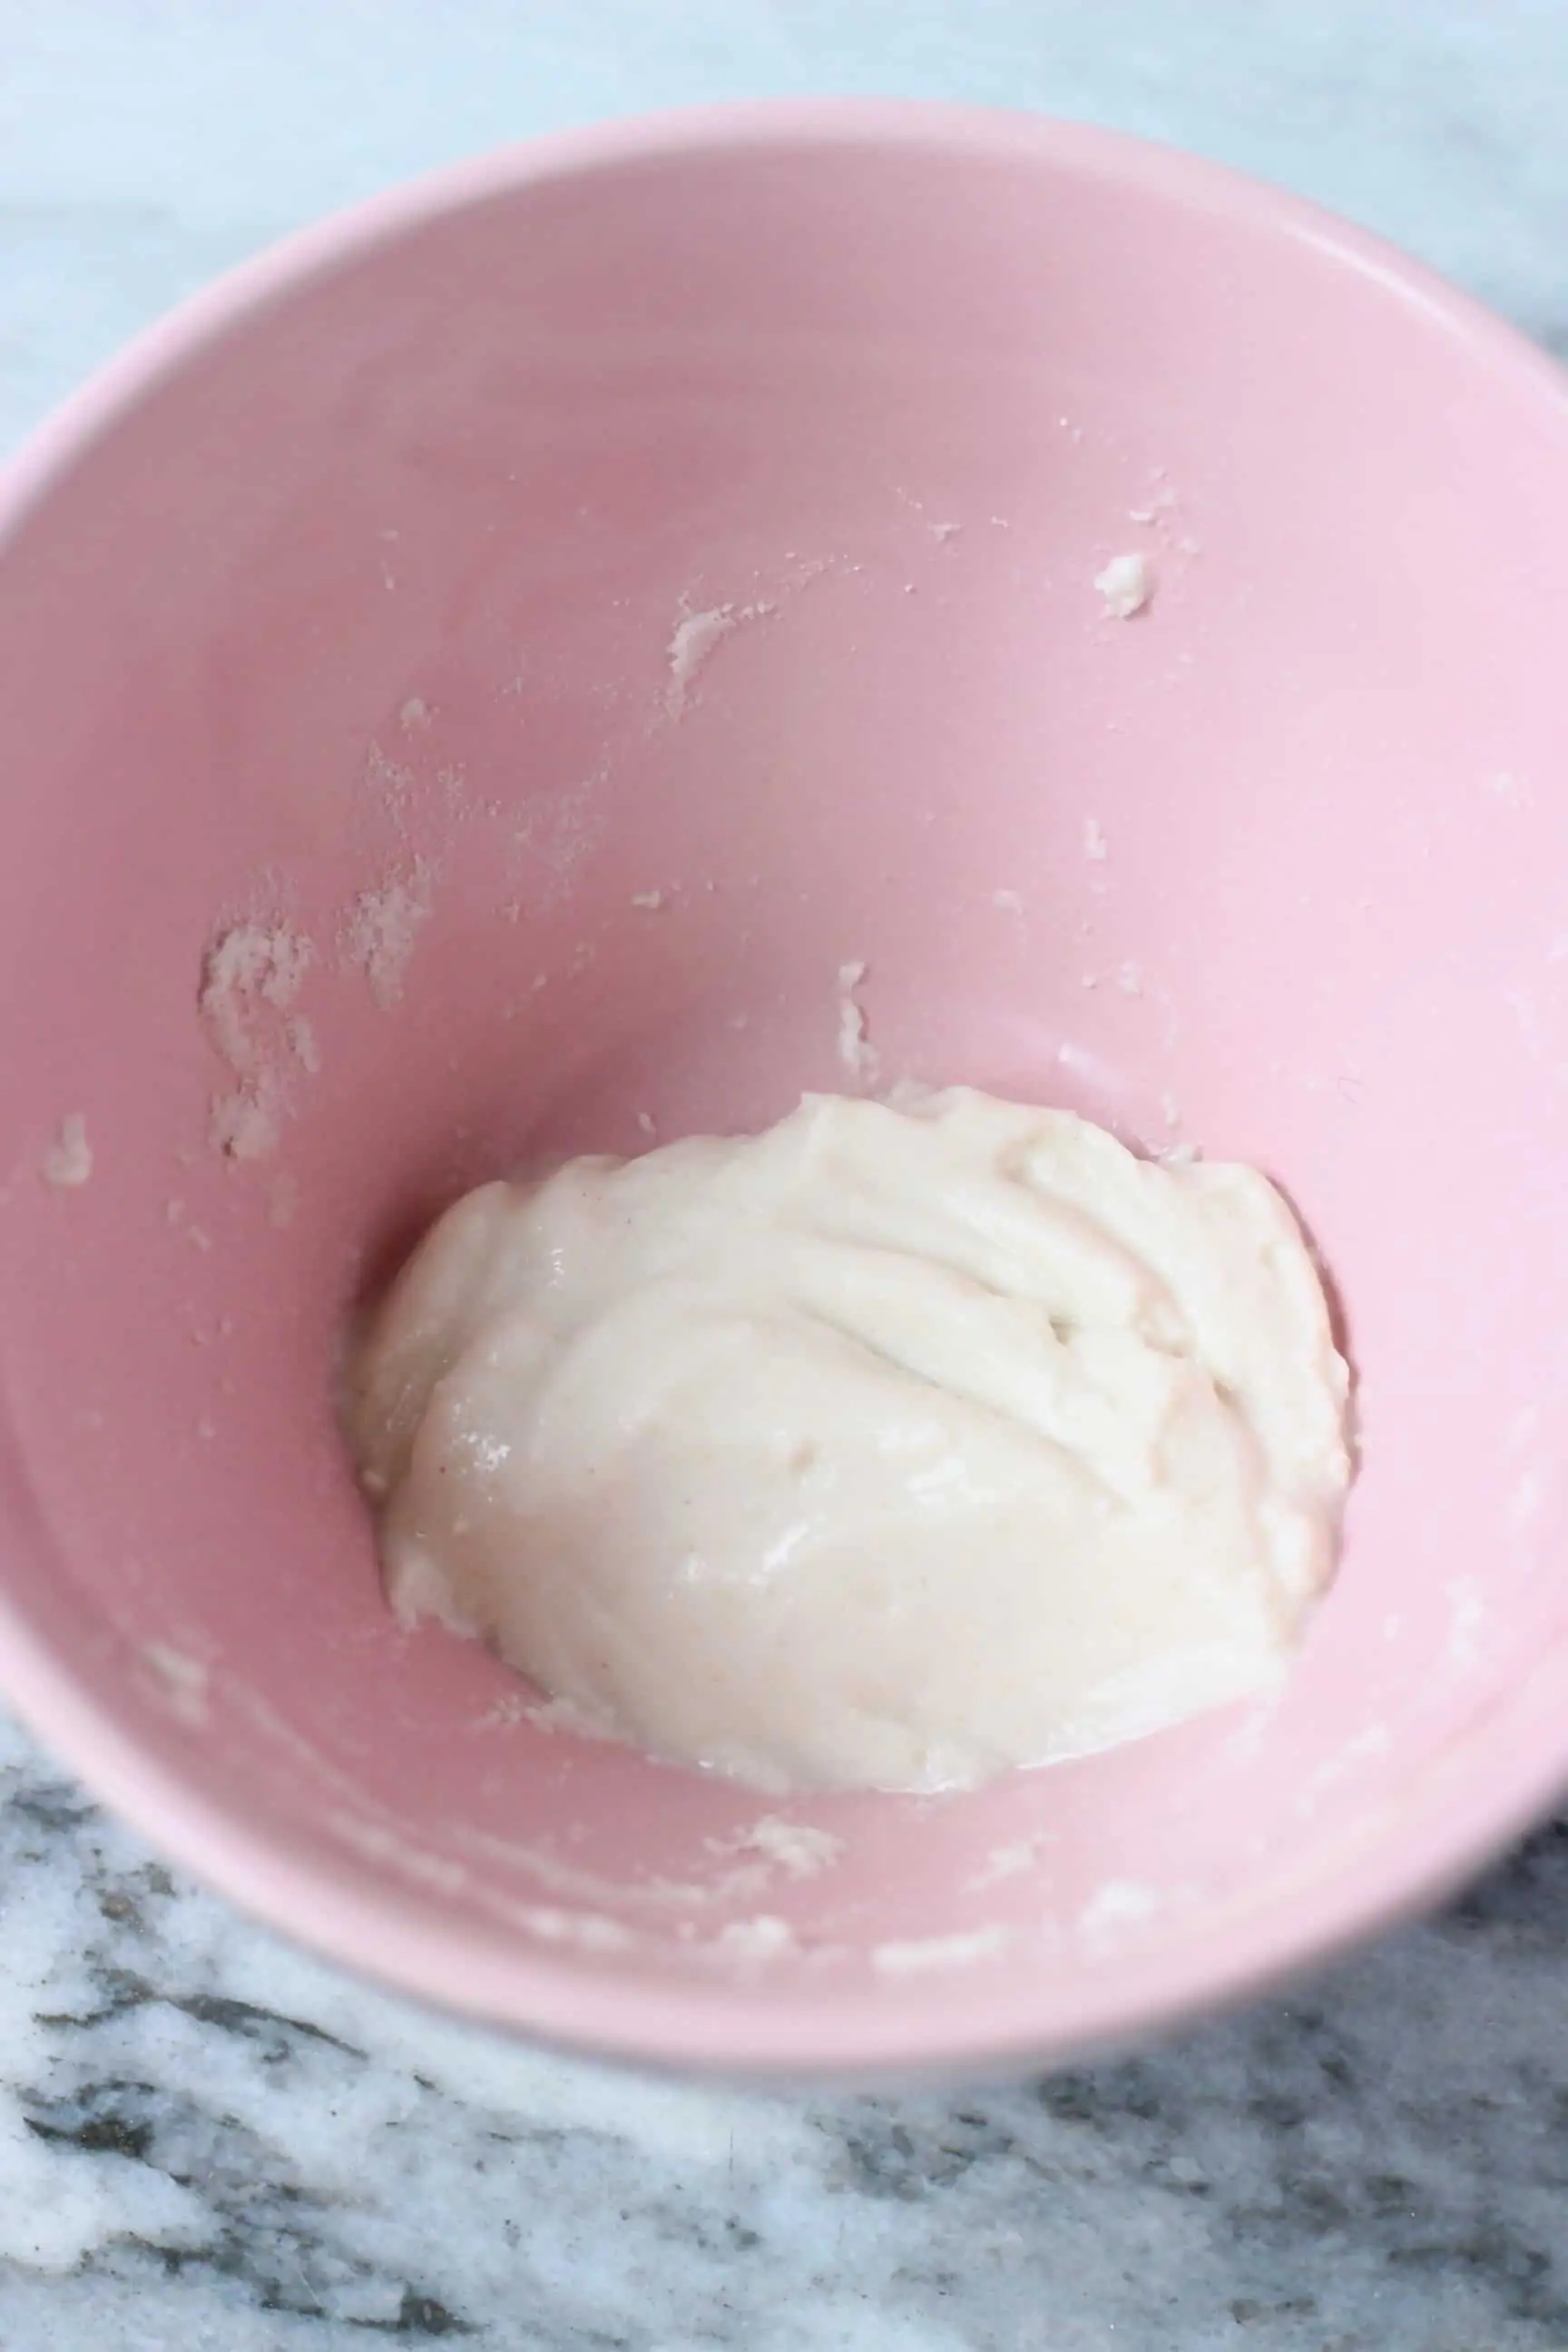 Flour and water paste in a pink bowl against a marble background